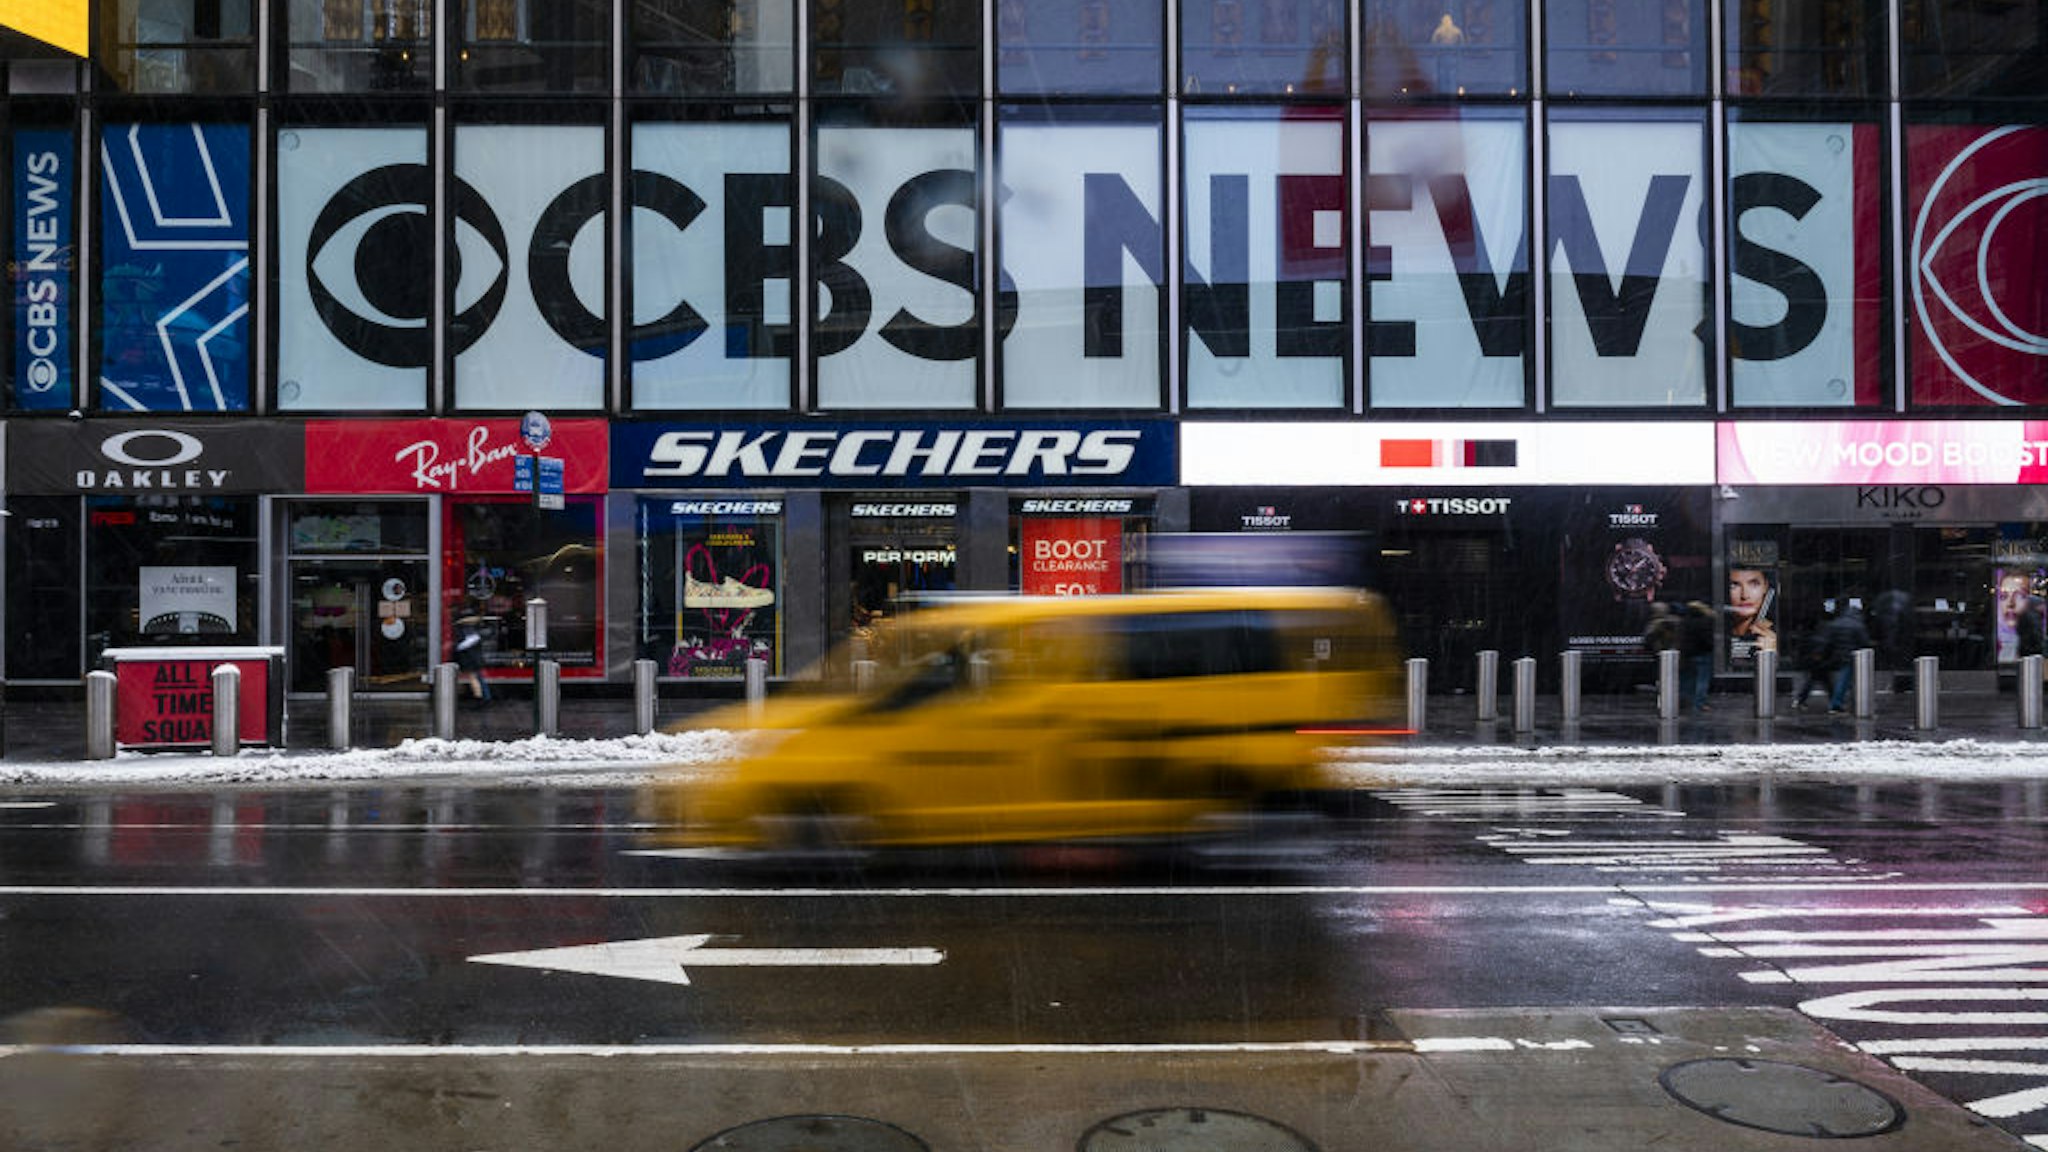 CBS News signage on the ViacomCBS headquarters during a winter storm in New York, U.S., on Friday, Feb. 19, 2021.